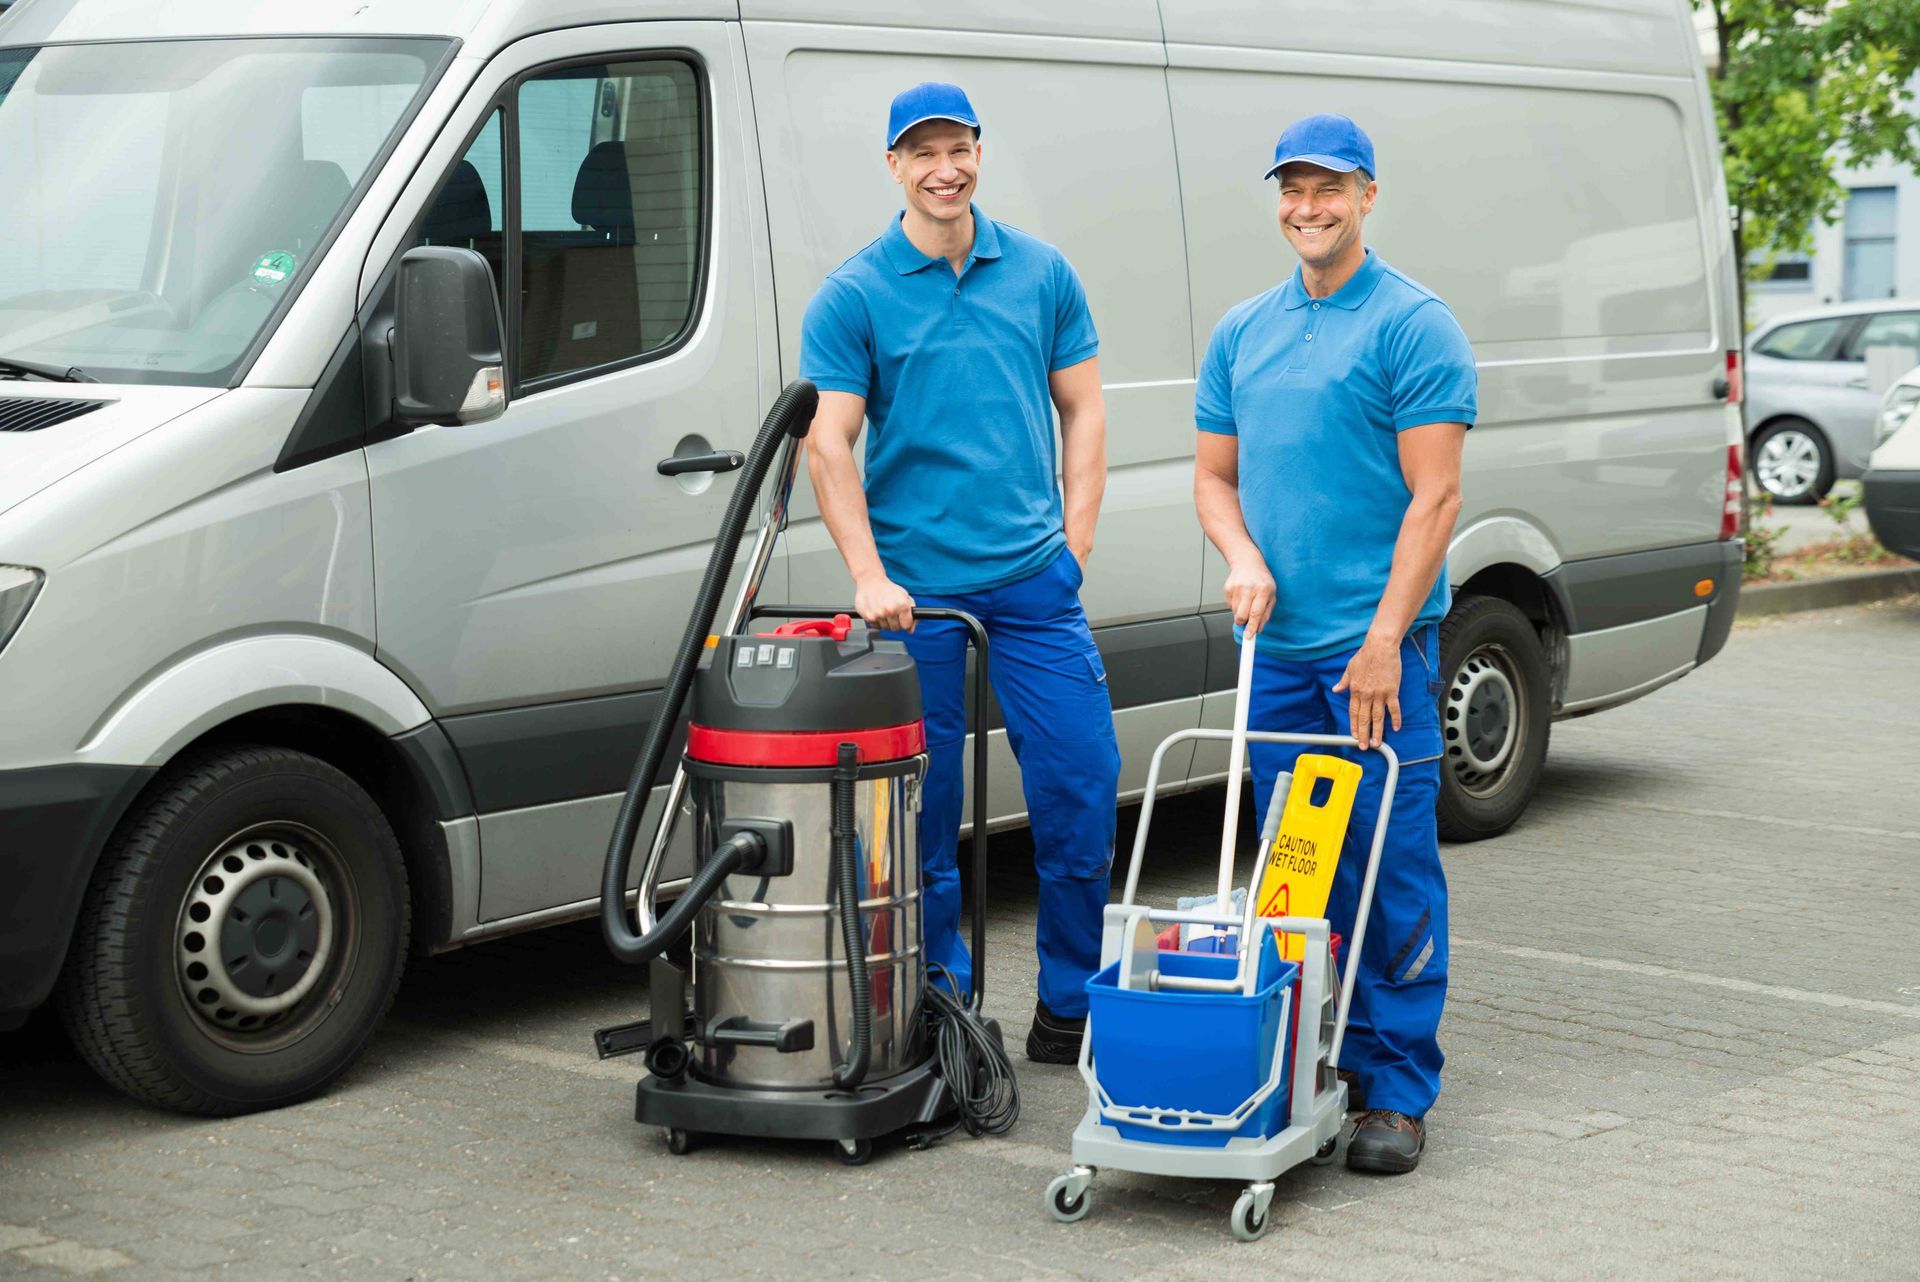 Two men are standing in front of a van with cleaning equipment